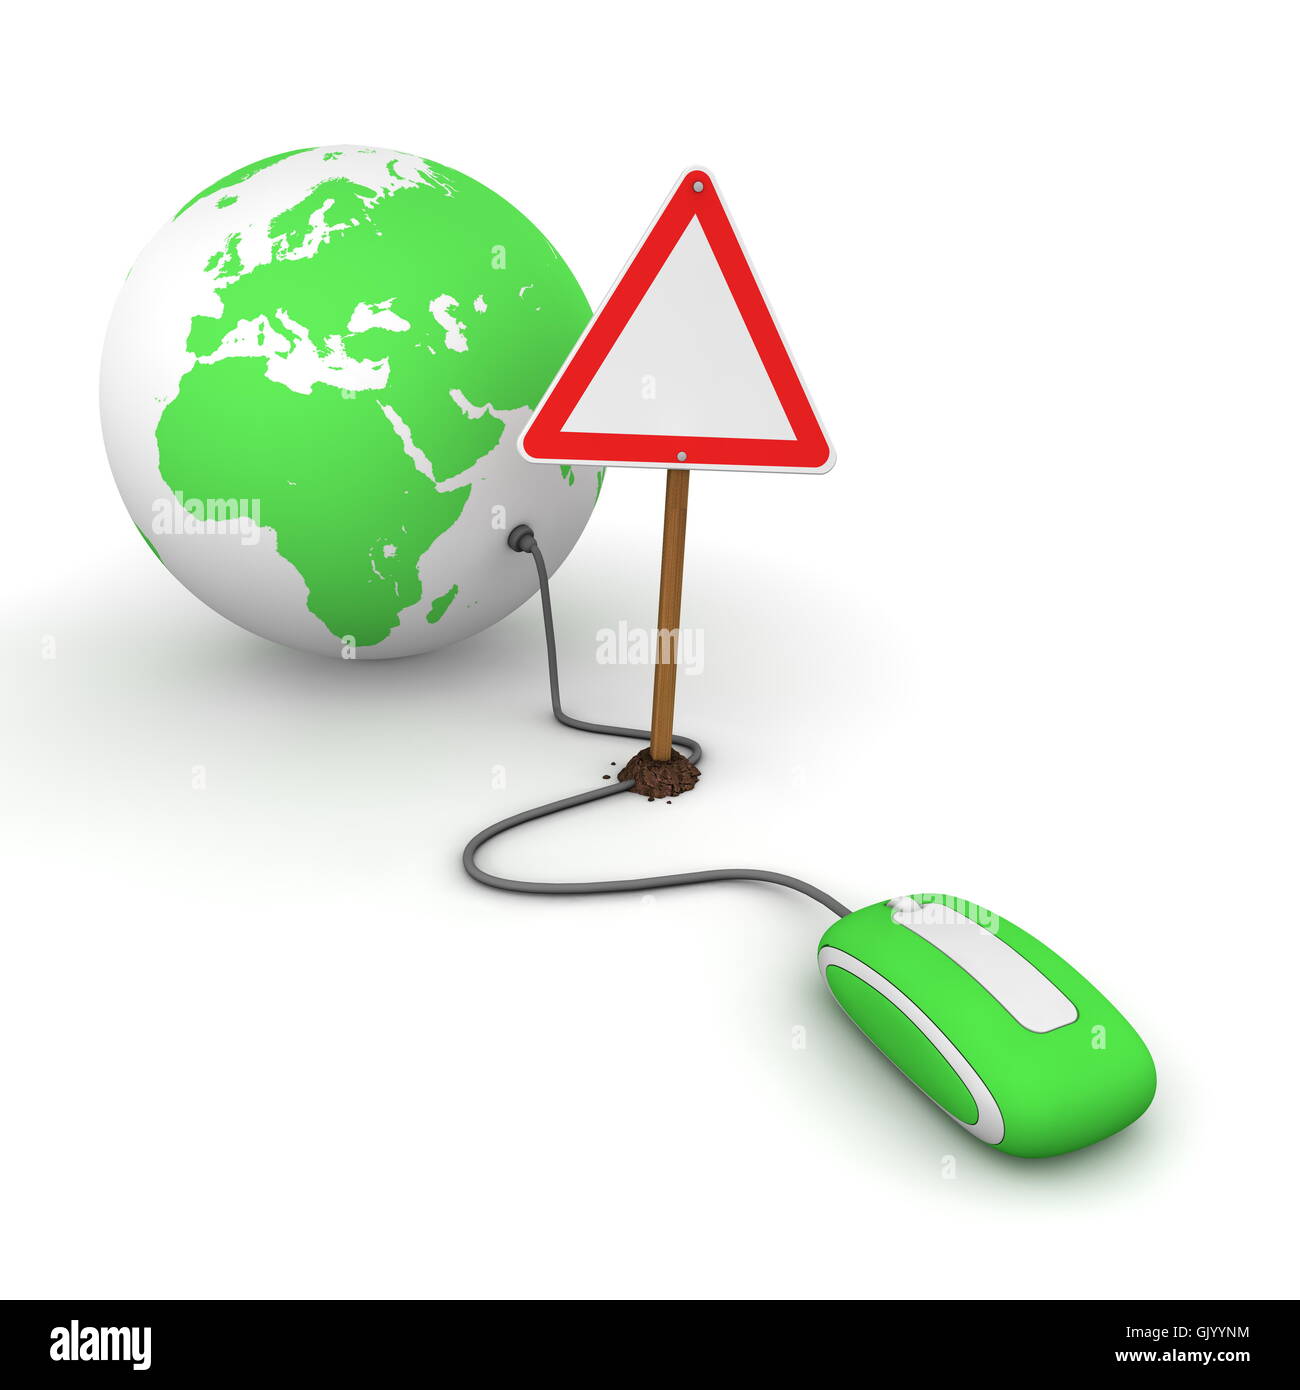 Surfing the Web in Green - Blocked by a Triangular Warning Sign Stock Photo